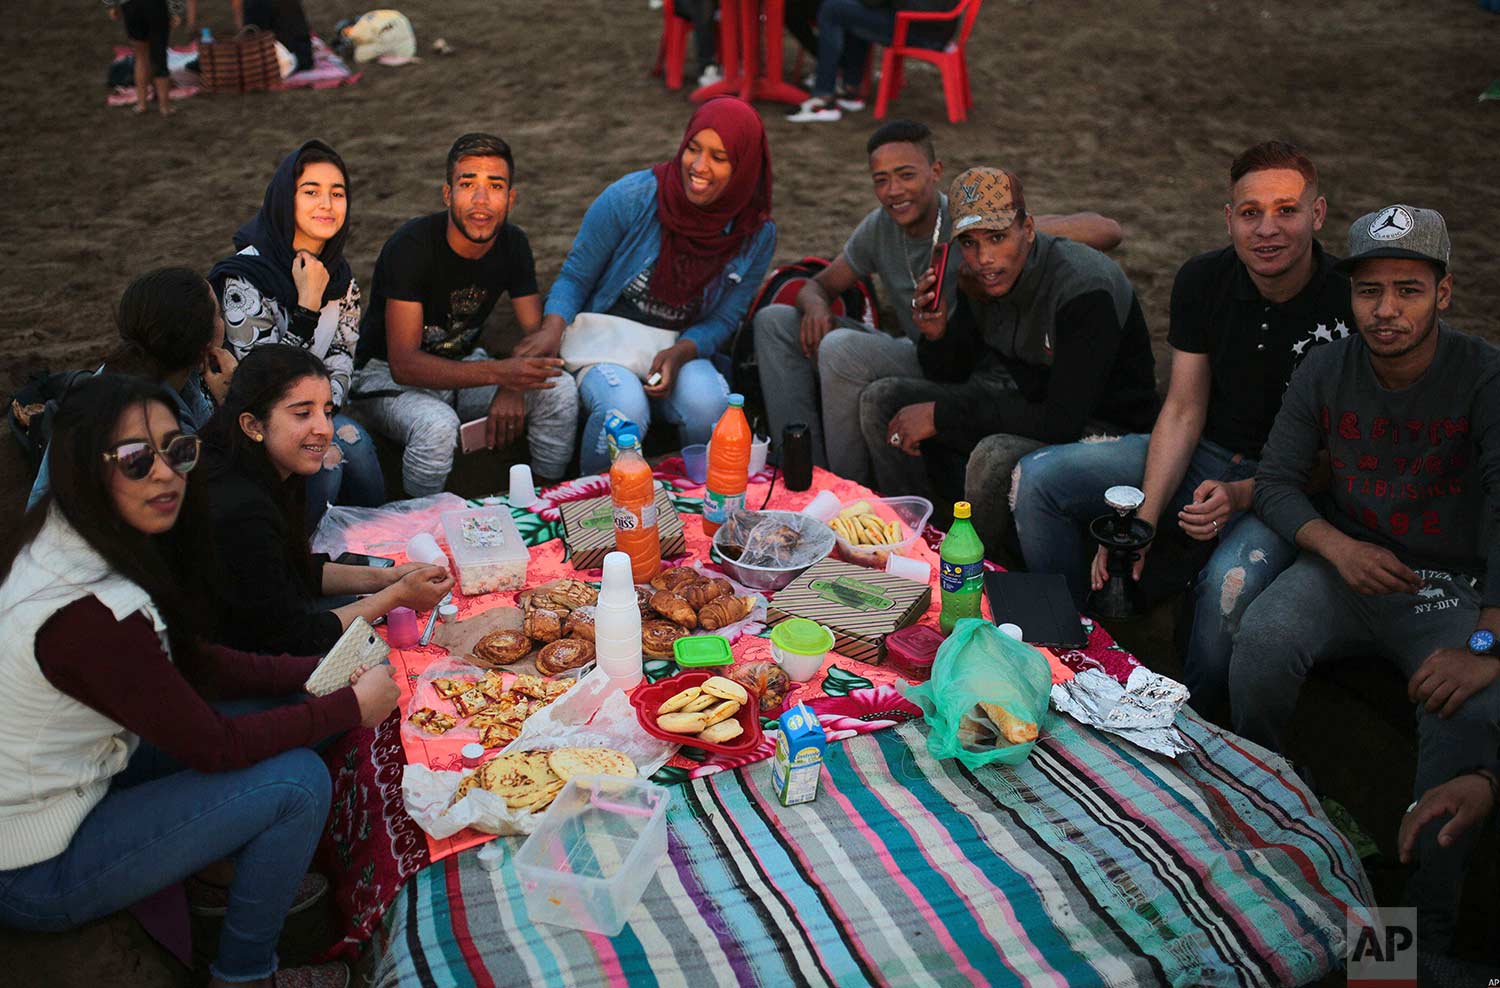  Friends gather to break their fast on the beach in the holy month of Ramadan, Rabat, Morocco, Saturday, June 9, 2018. (AP Photo/Mosa'ab Elshamy) 